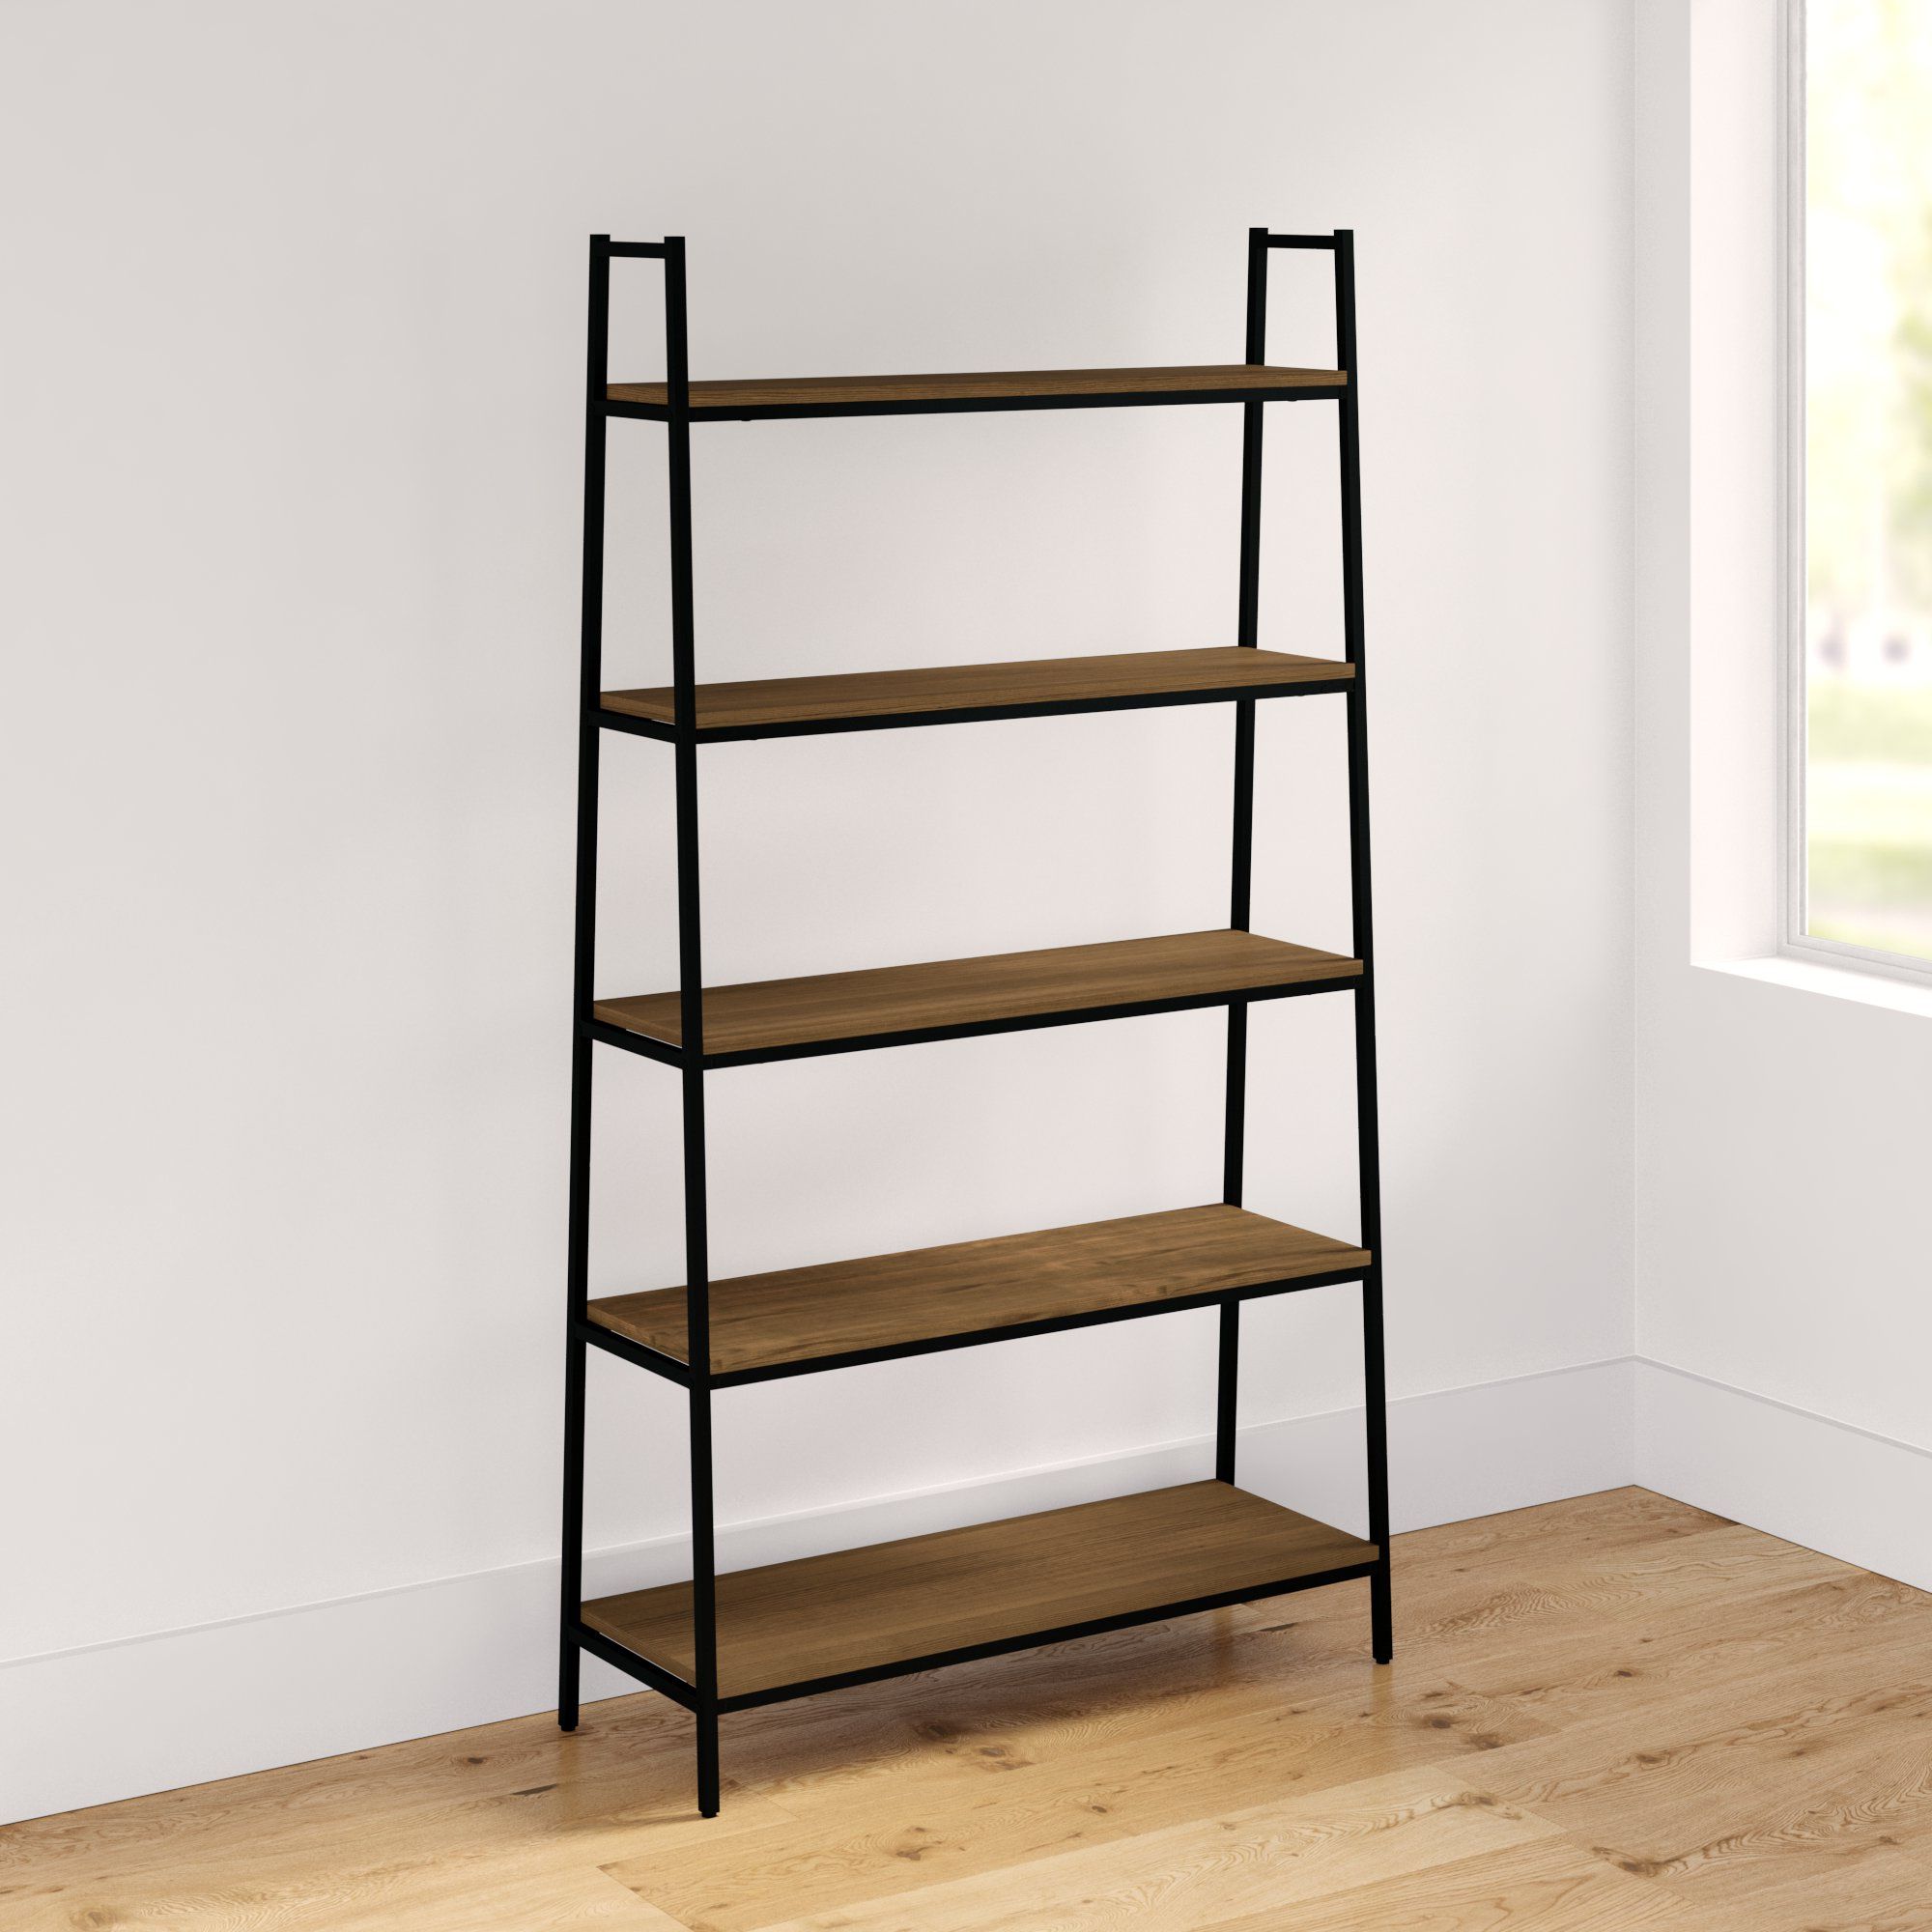 Champney Modern Etagere Bookcases With Regard To Recent Champney Etagere Bookcase (View 5 of 20)